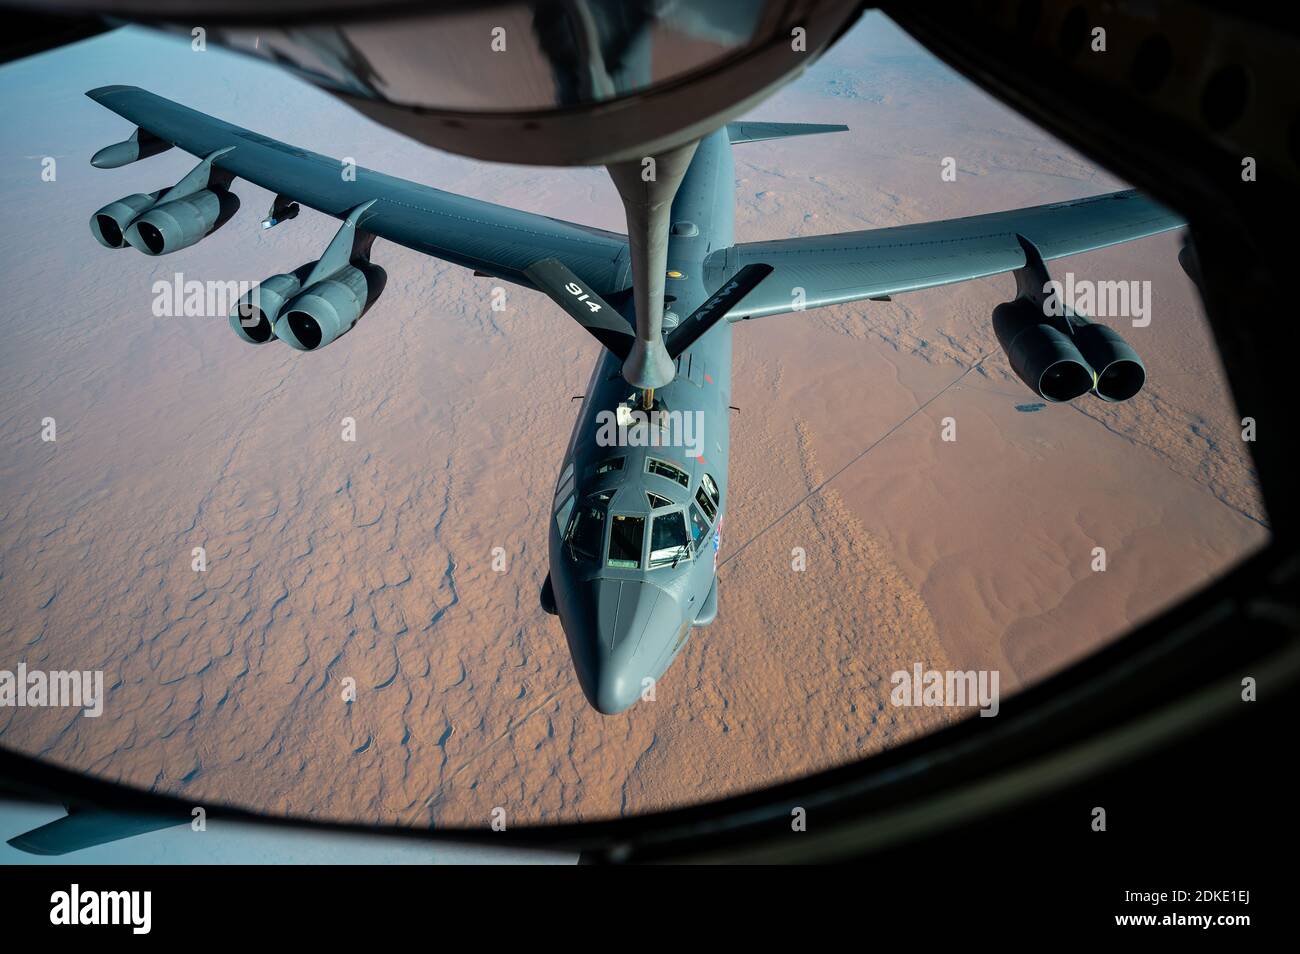 A U.S. Air Force B-52 Stratofortress strategic bomber aircraft from the 2nd Bomb Wing, is refueled inflight from a KC-135 Stratotanker aircraft during a multi-day Bomber Task Force mission December 10, 2020 over Qatar. The bomber was relocated to the region following an increase in tensions with Iran. Stock Photo